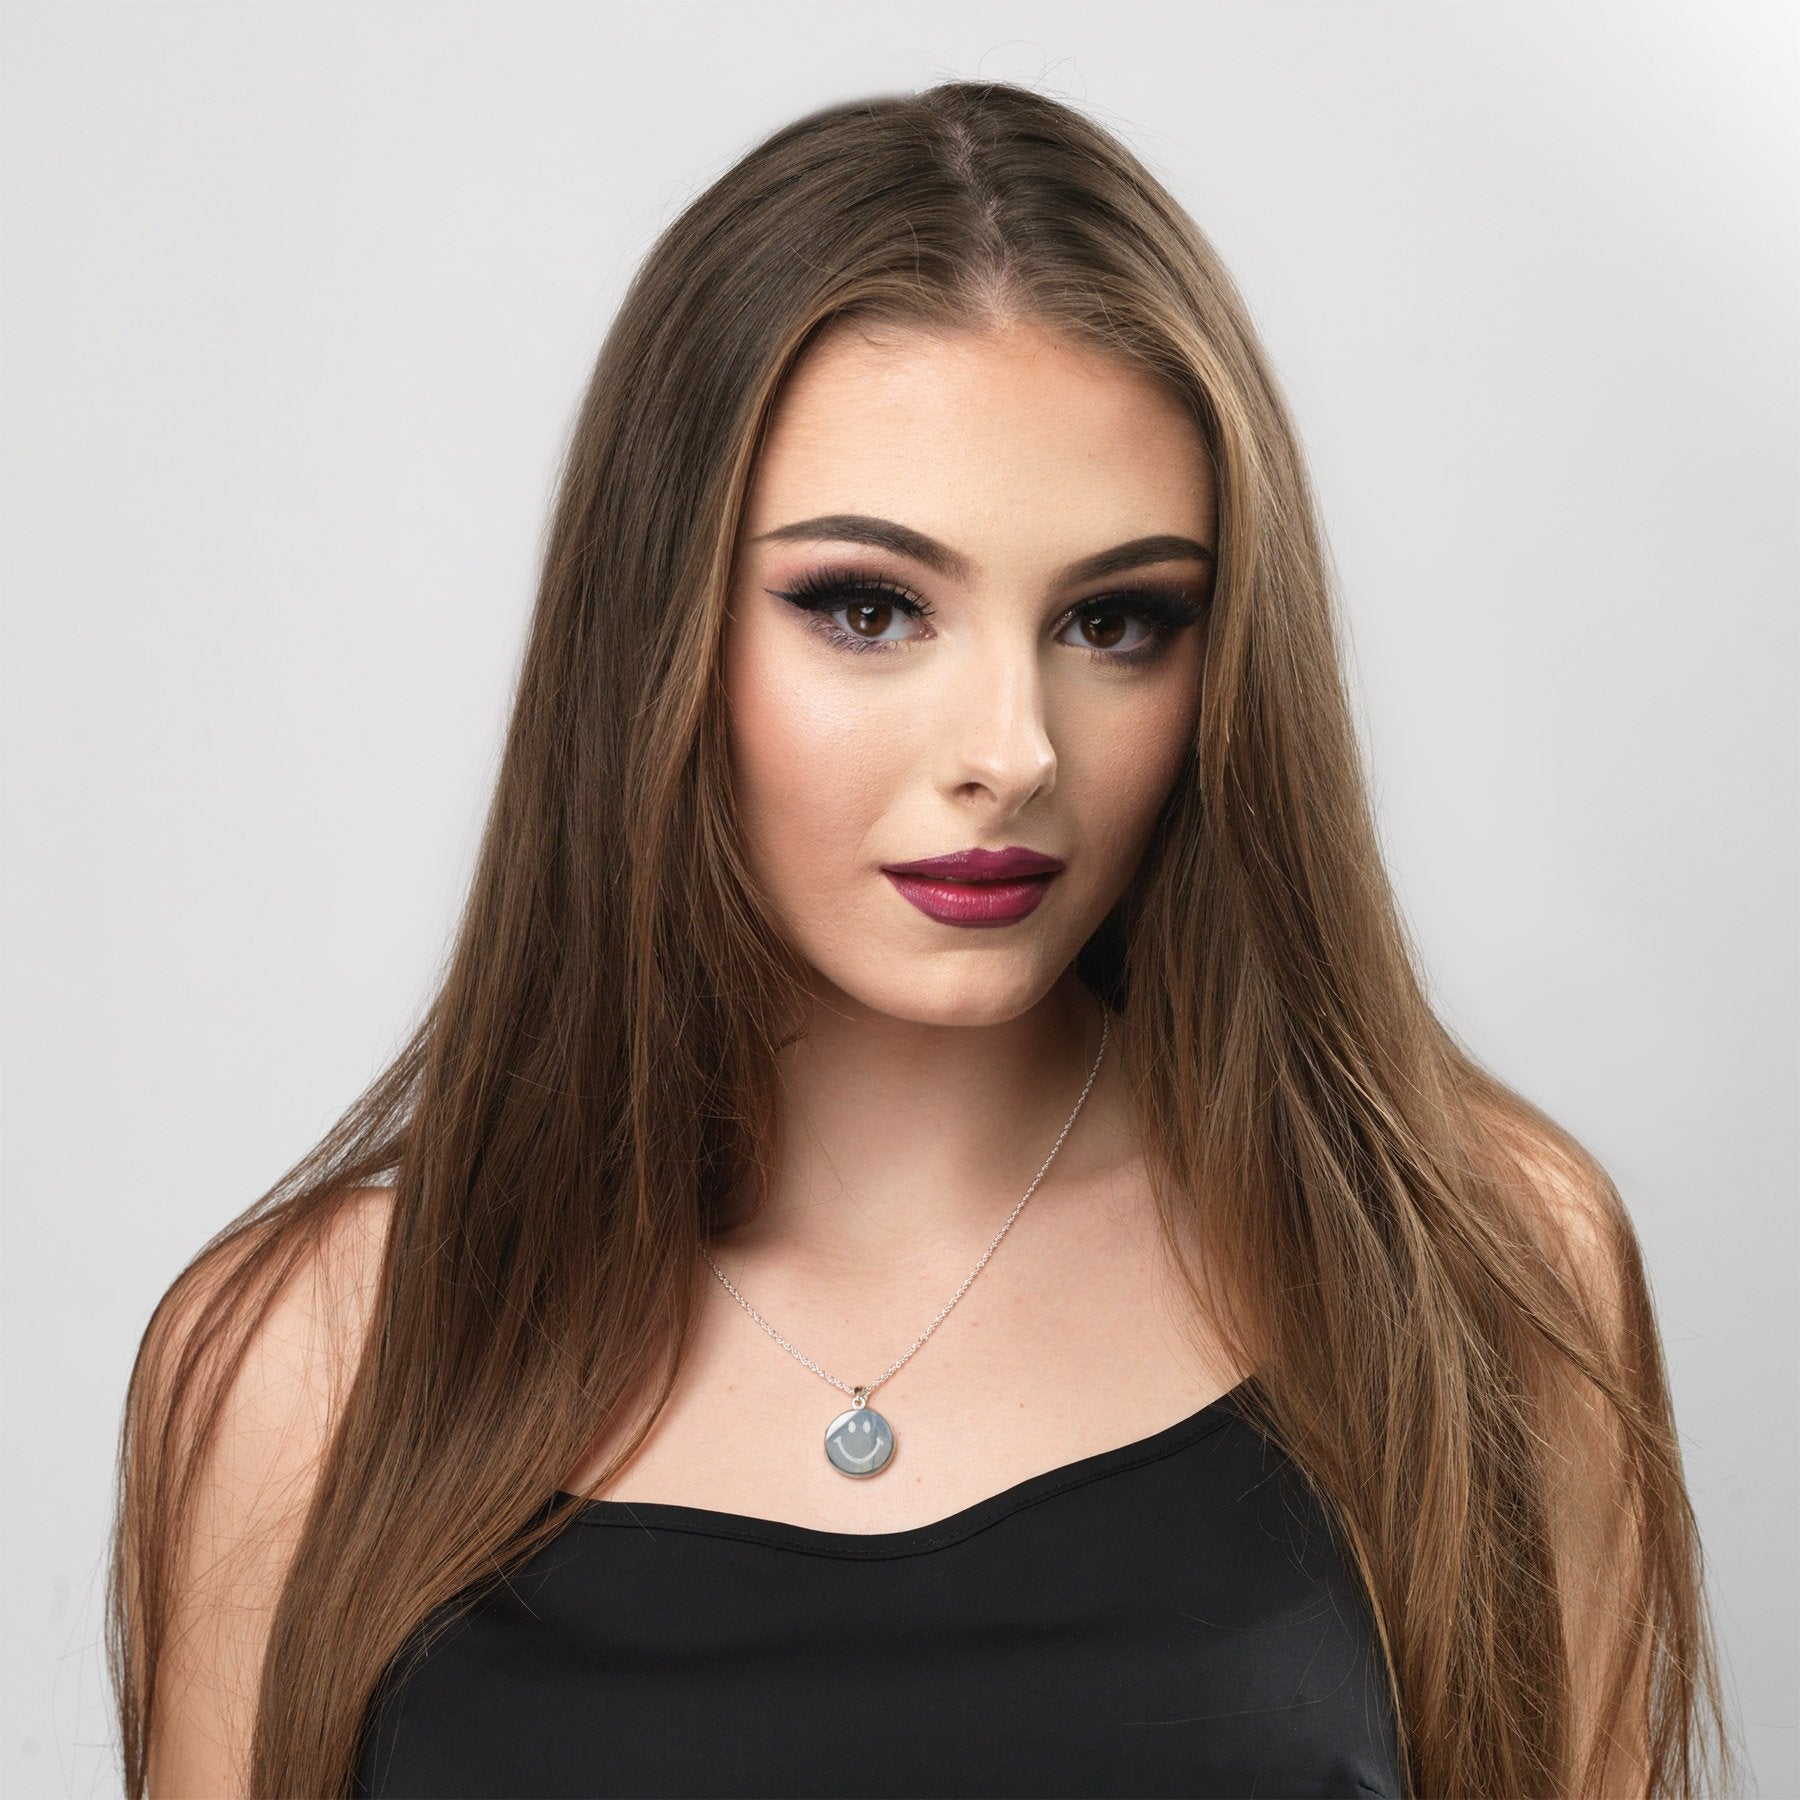 model wearing a sterling silver round locket with a smiley emoji engraved on the front